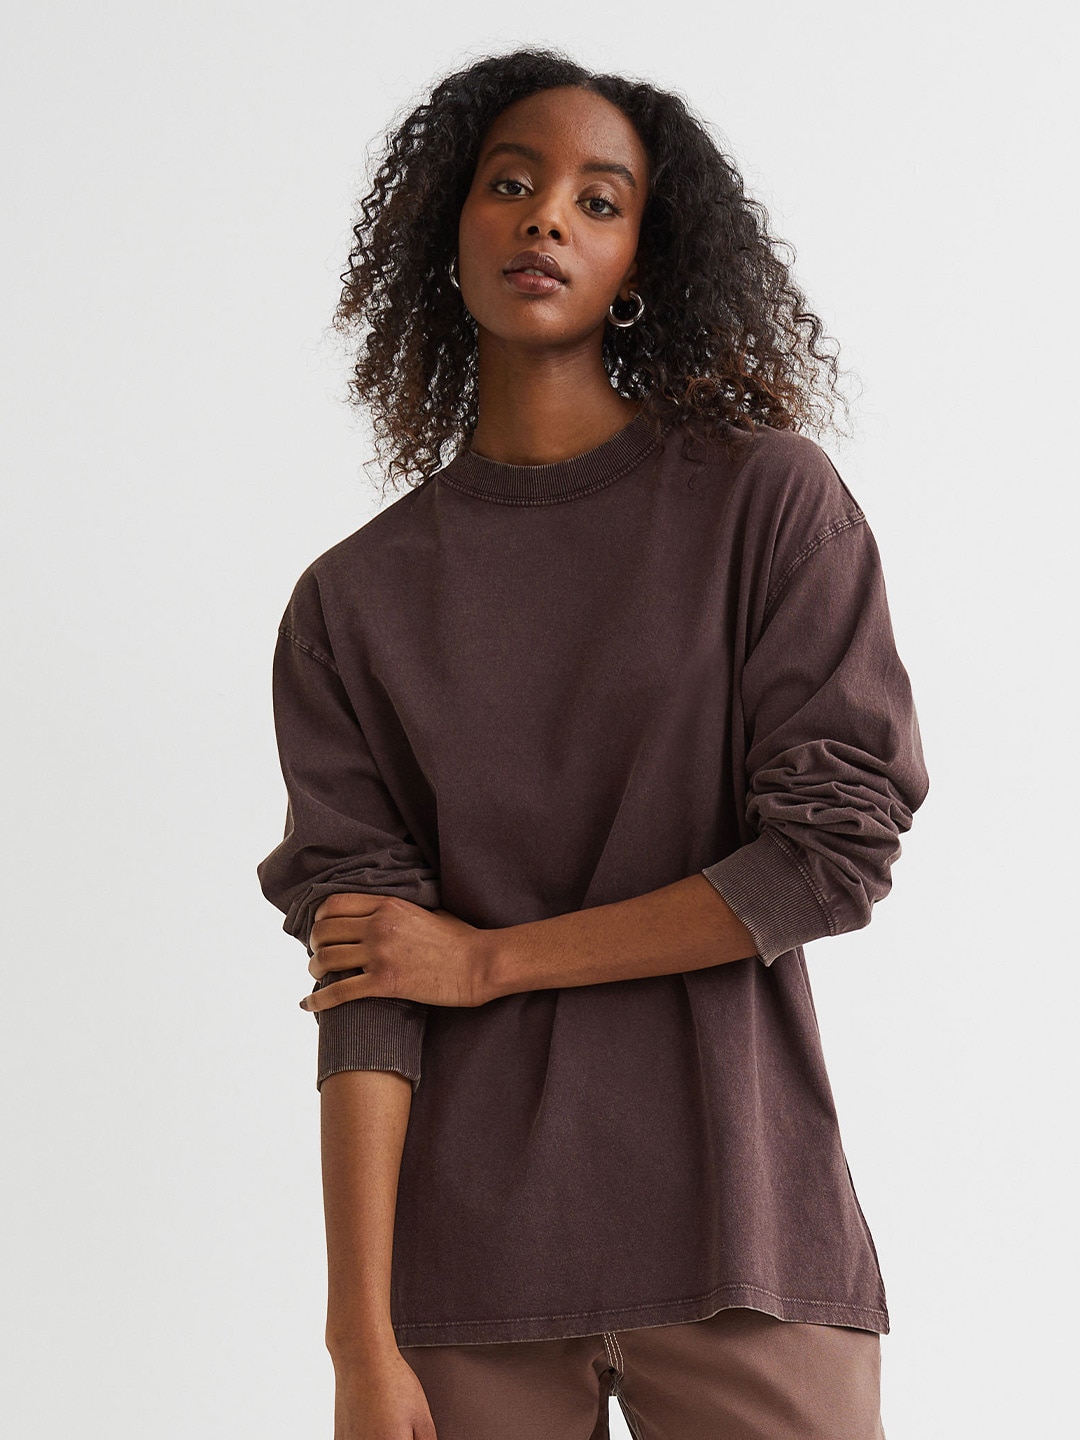 H&M Women Brown Long-Sleeved Jersey Top Price in India